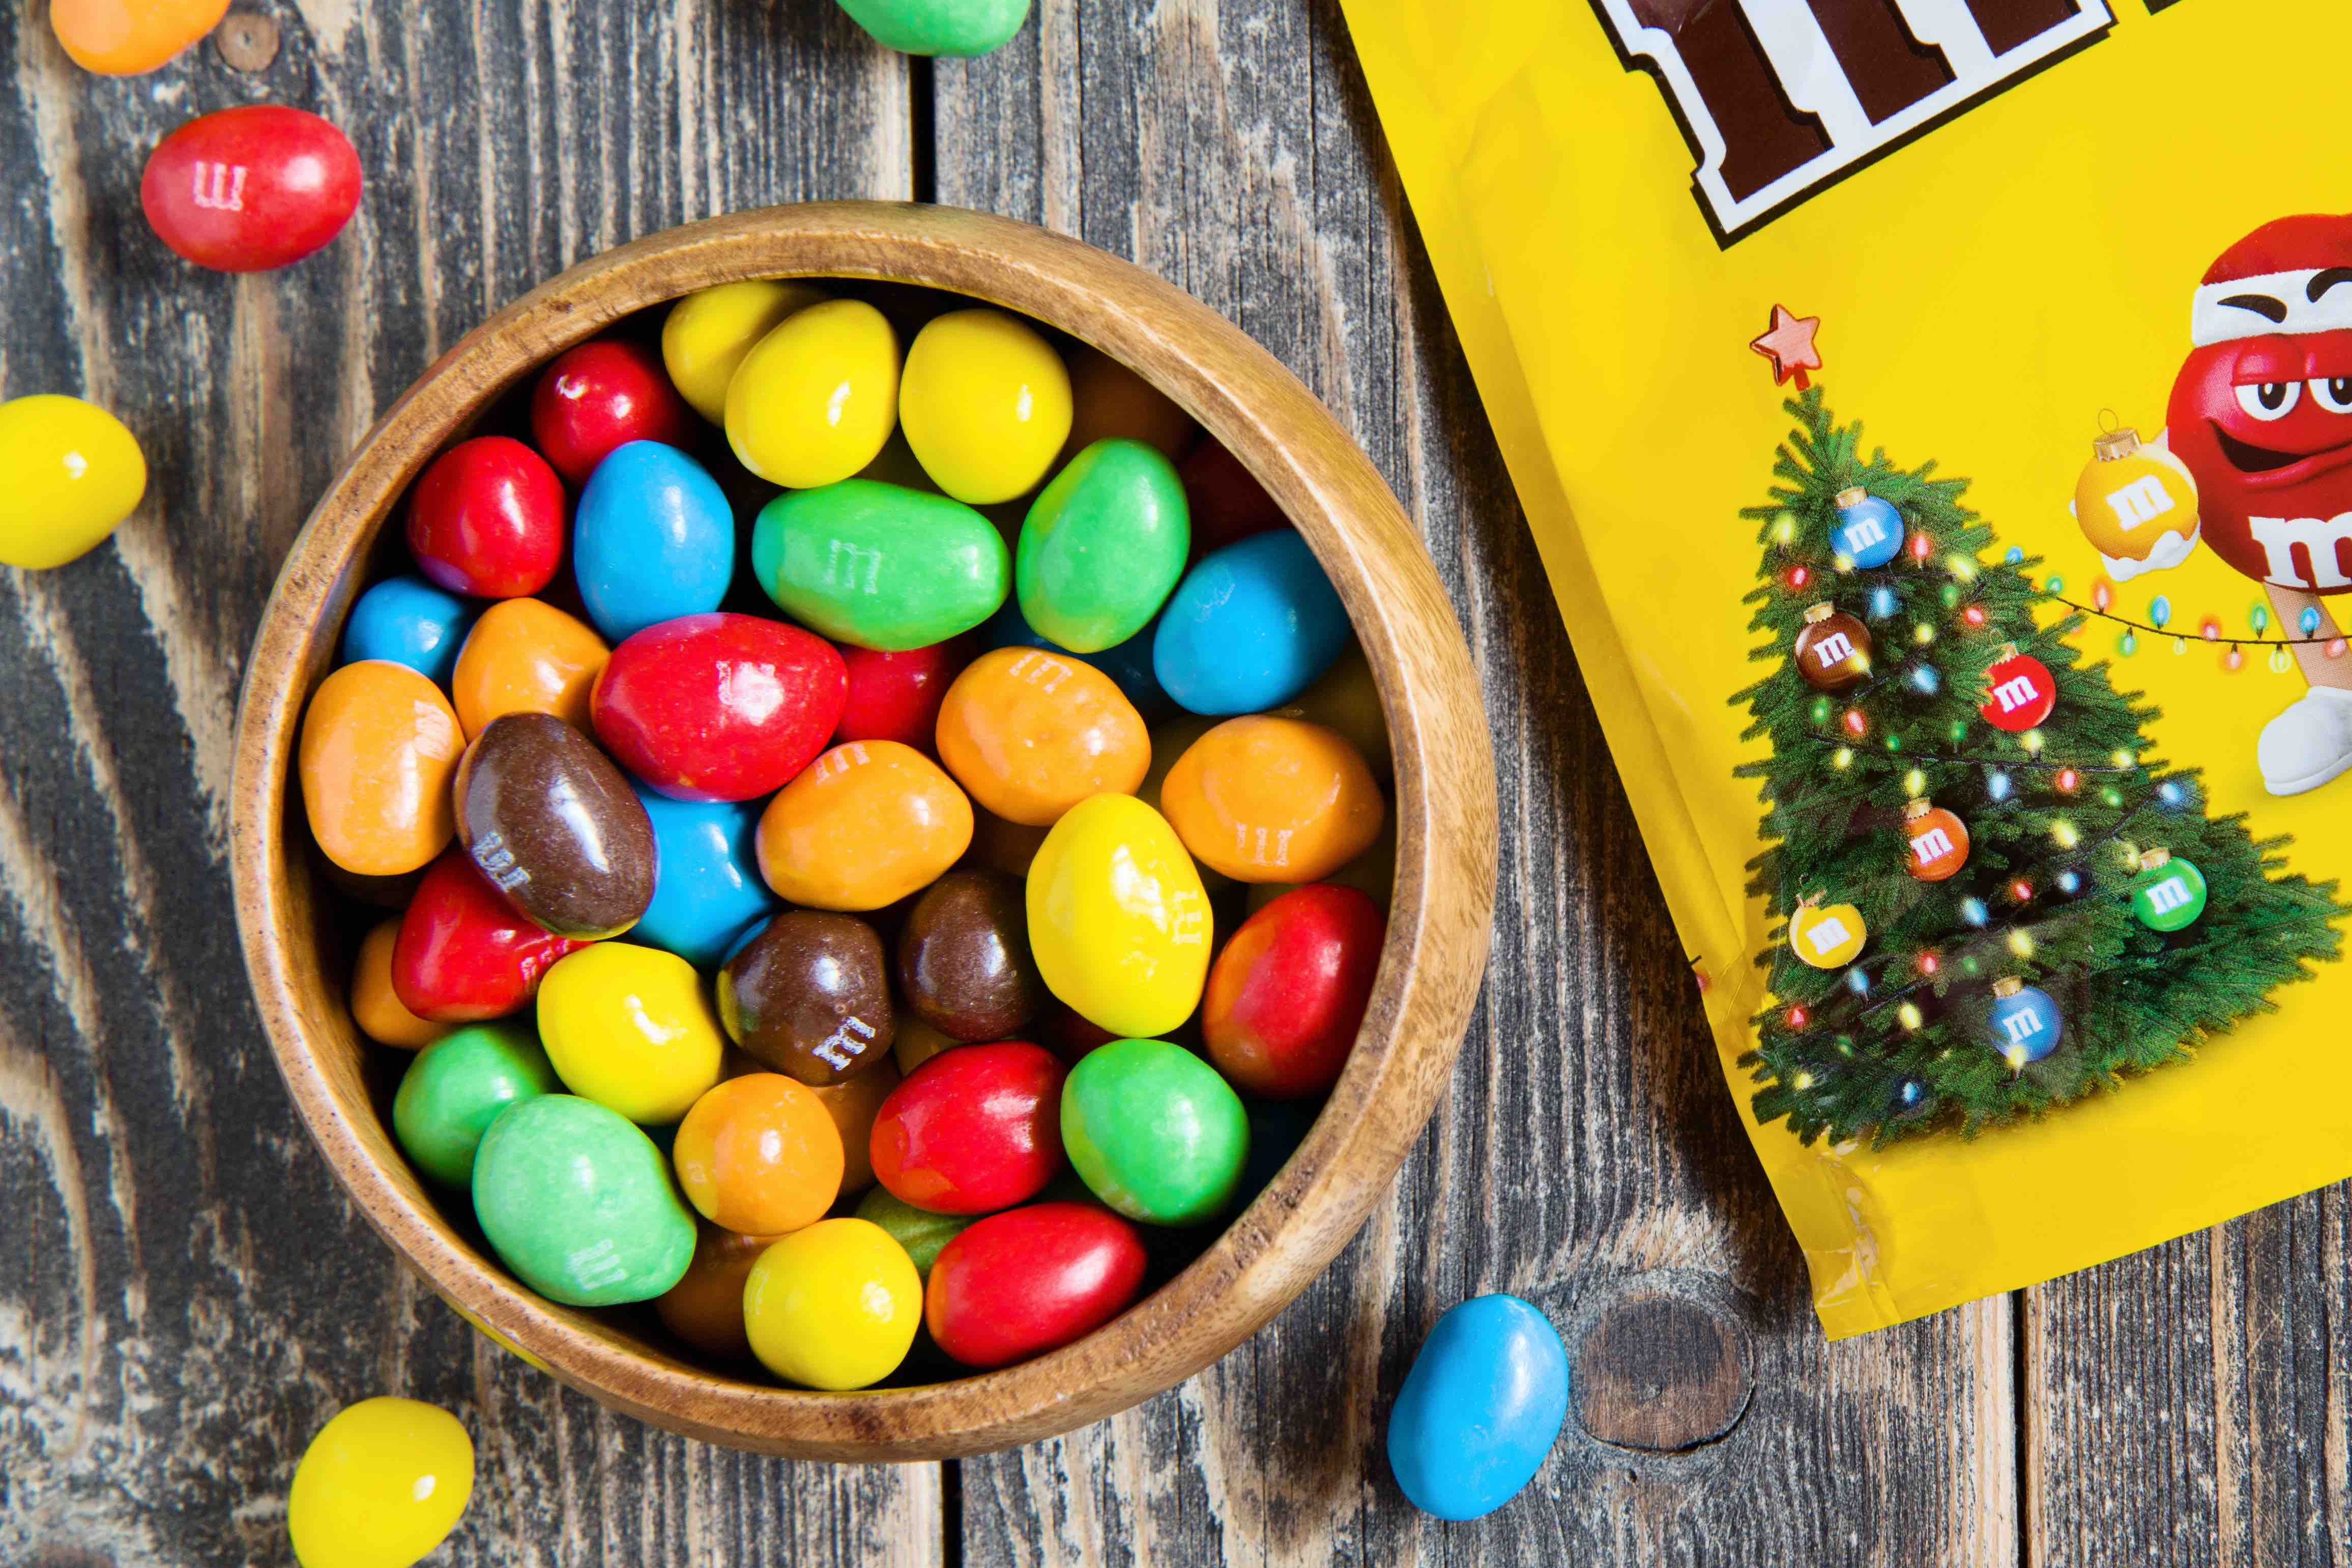 11 Peanut M&M's Nutrition Facts: A Tasty and Nutritious Delight